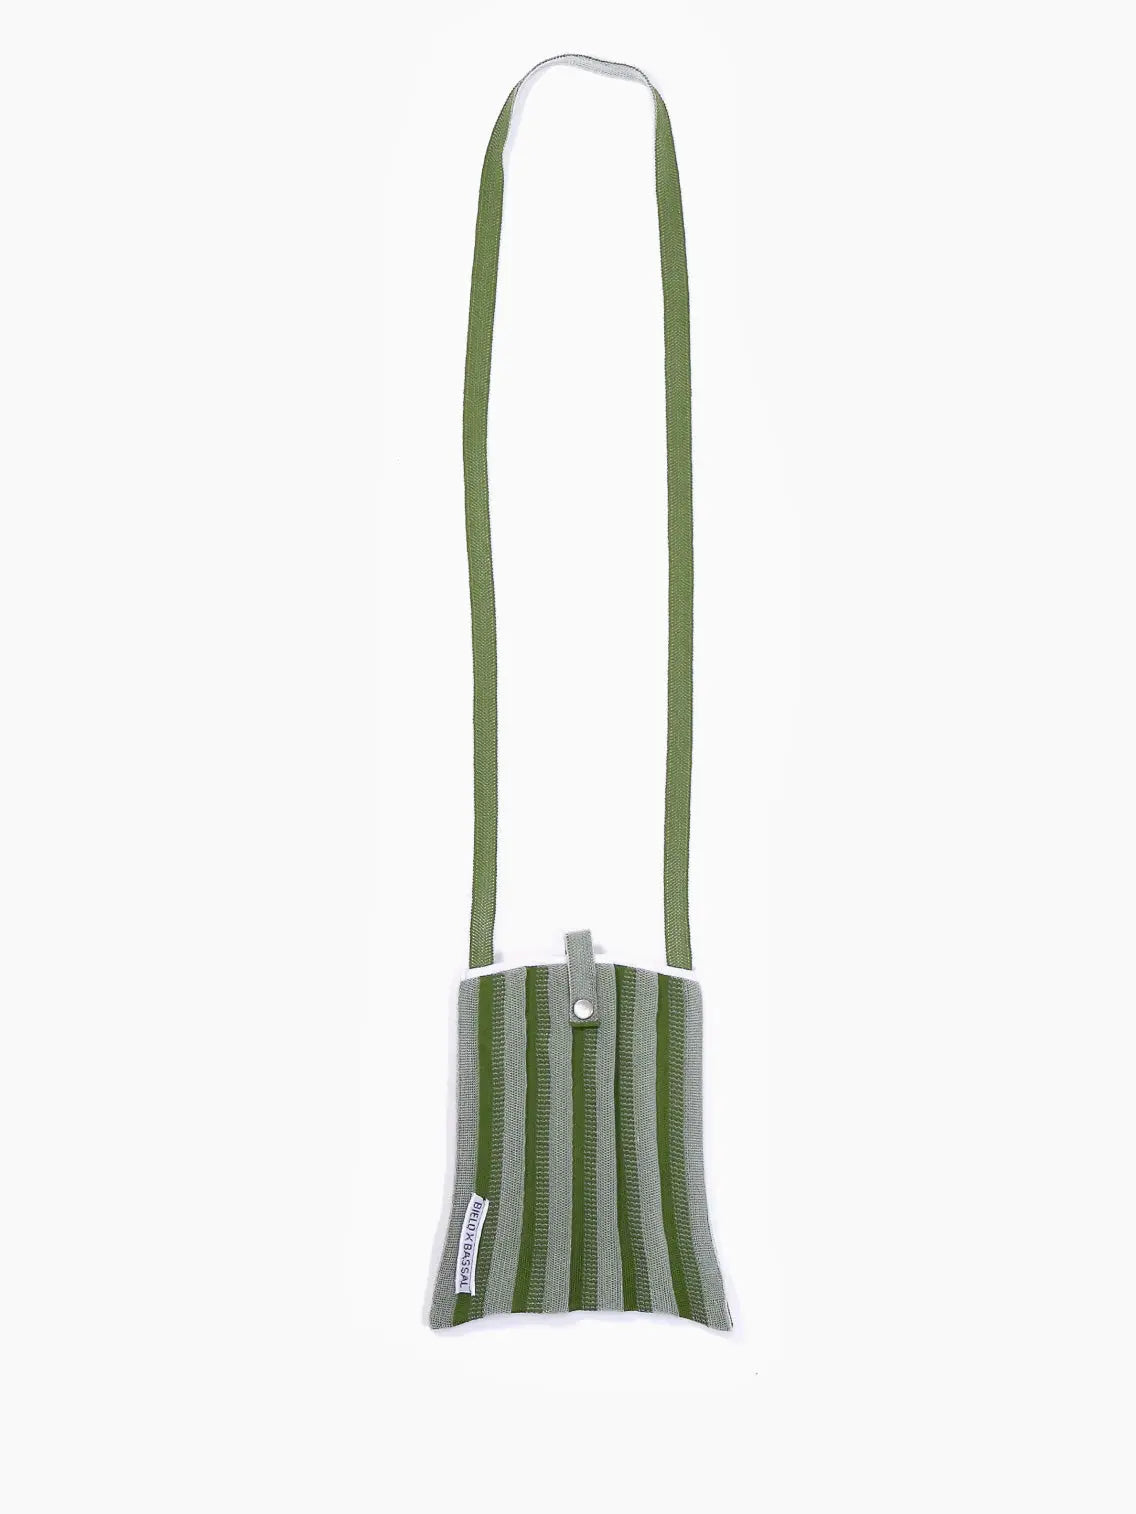 A small green and gray striped fabric bag with a shoulder strap. The Green Shoulder Bag features a snap button closure at the top and a small rectangular label with text on the lower left side. Proudly displayed by Bielo x Bassal Store, this stylish accessory brings a touch of Barcelona charm to your wardrobe against a plain white background.